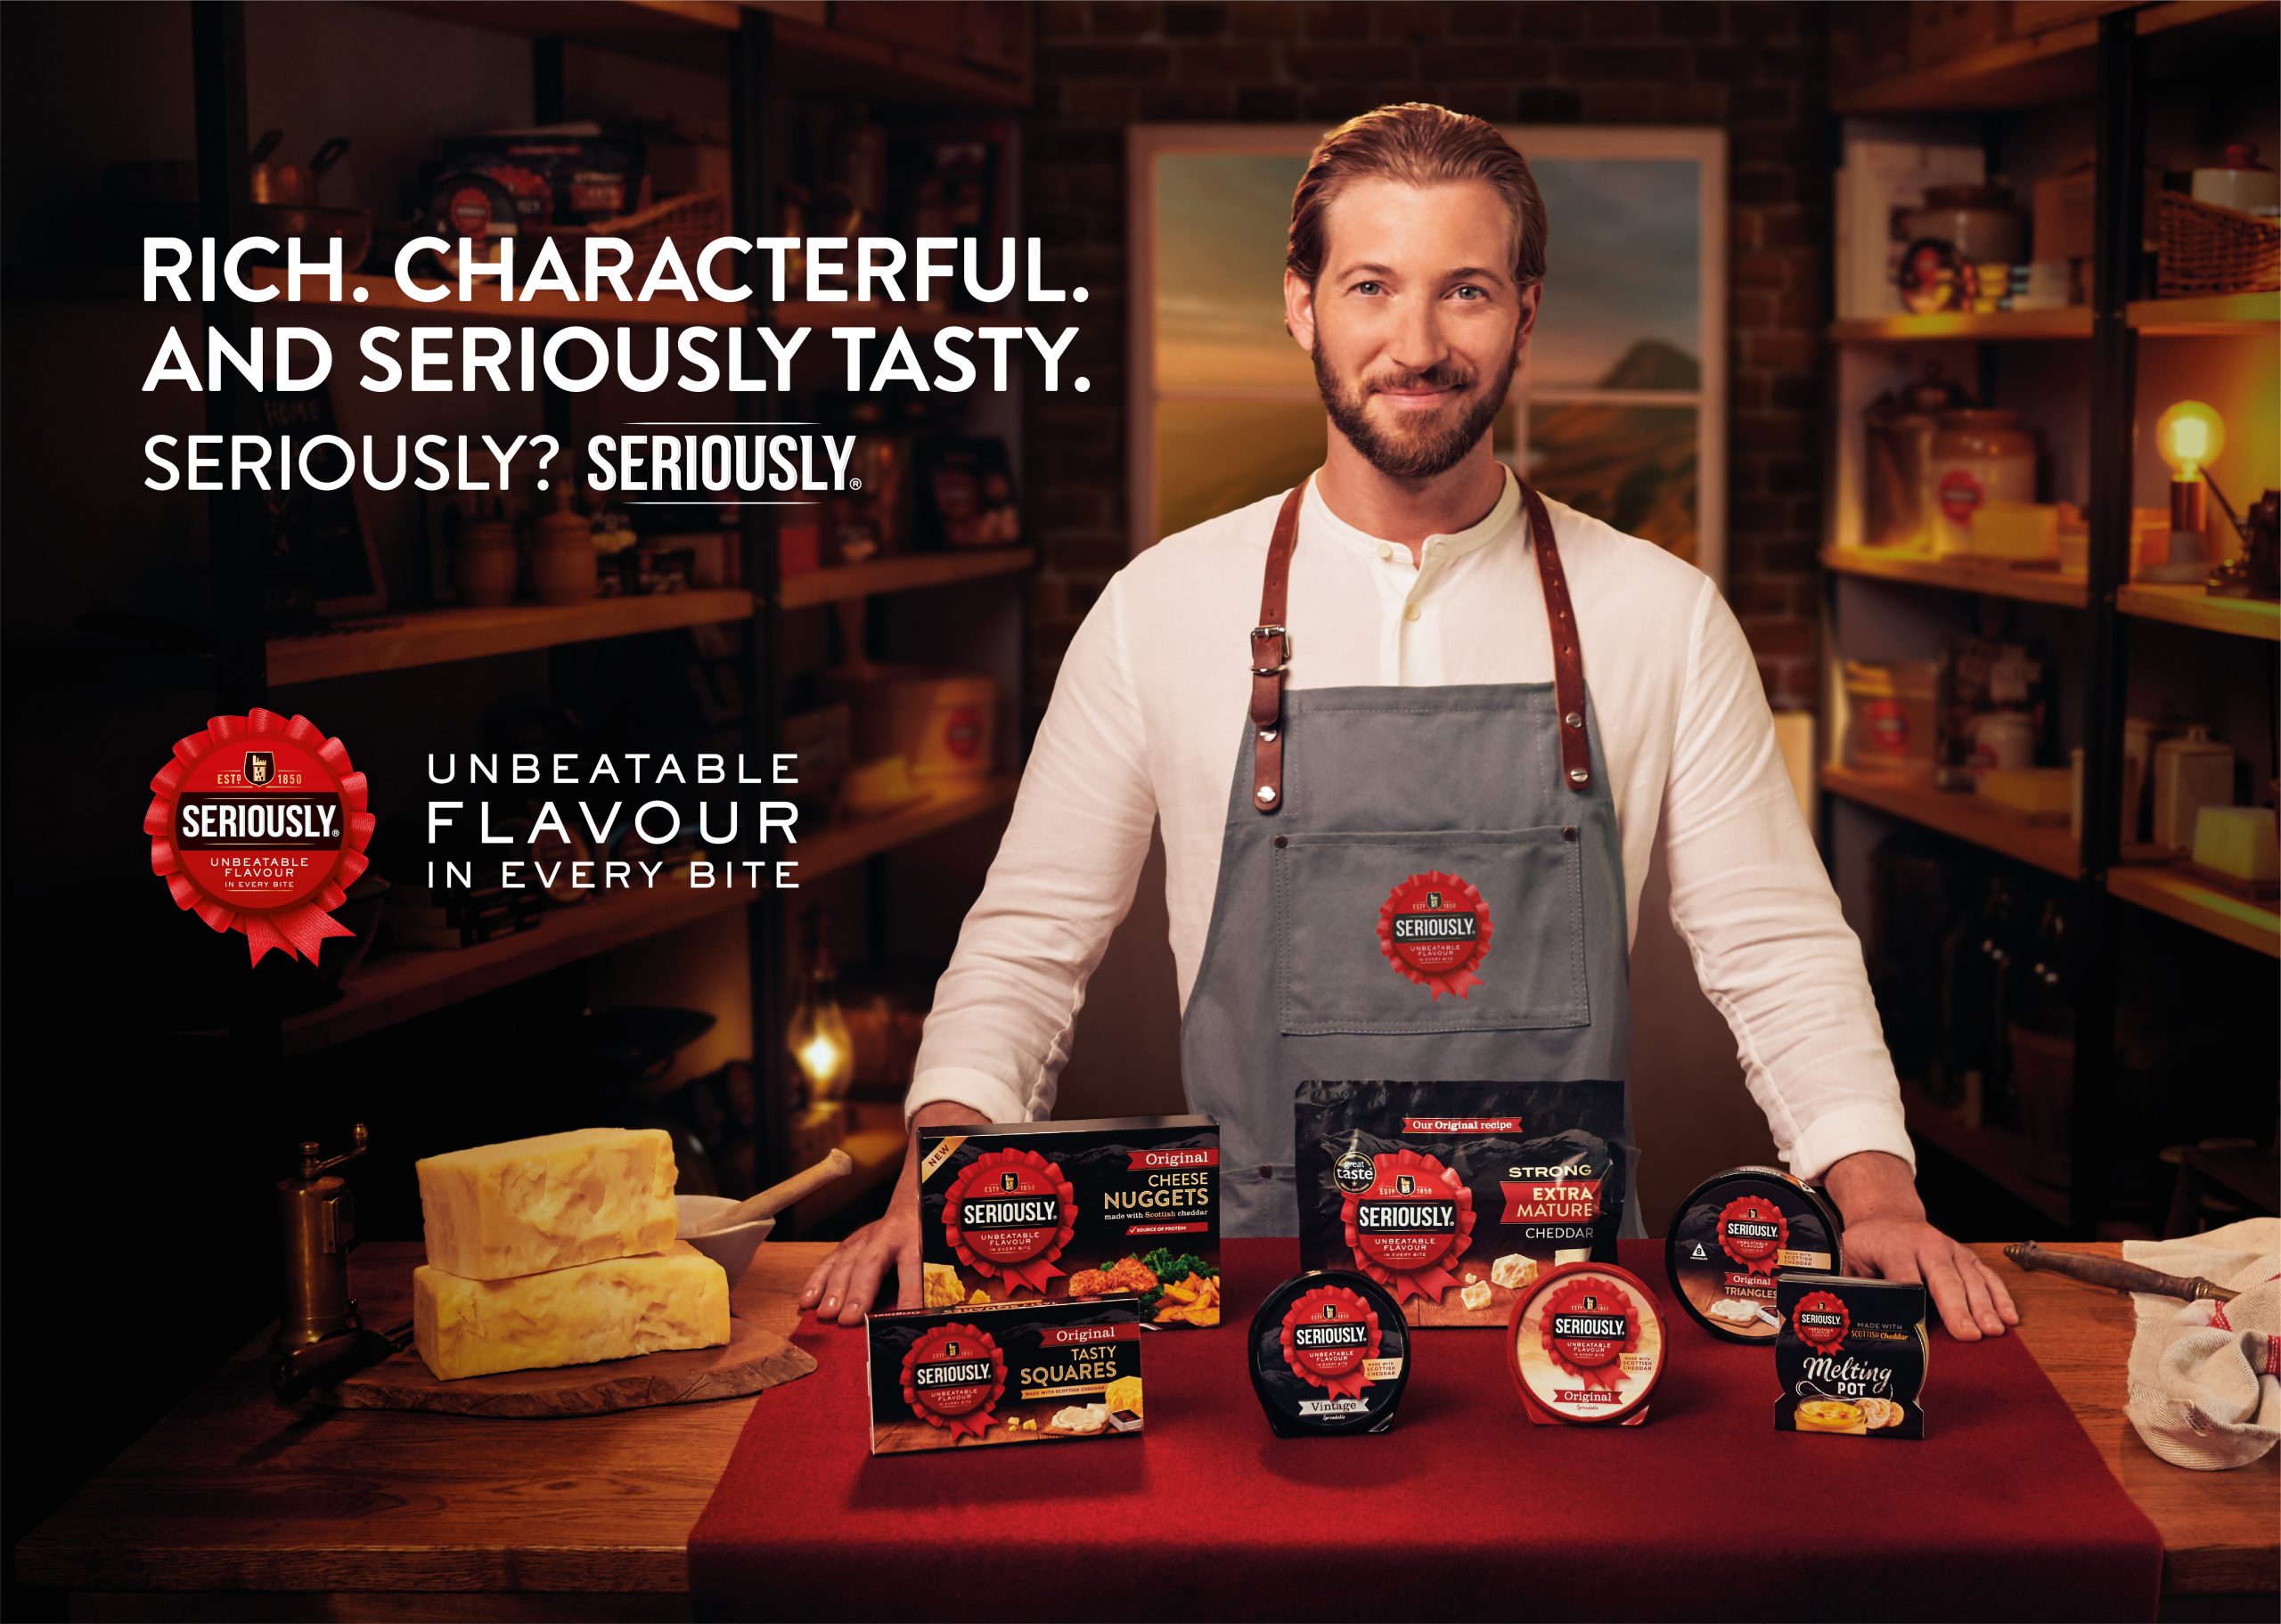 Lactalis invests in Seriously with new campaign